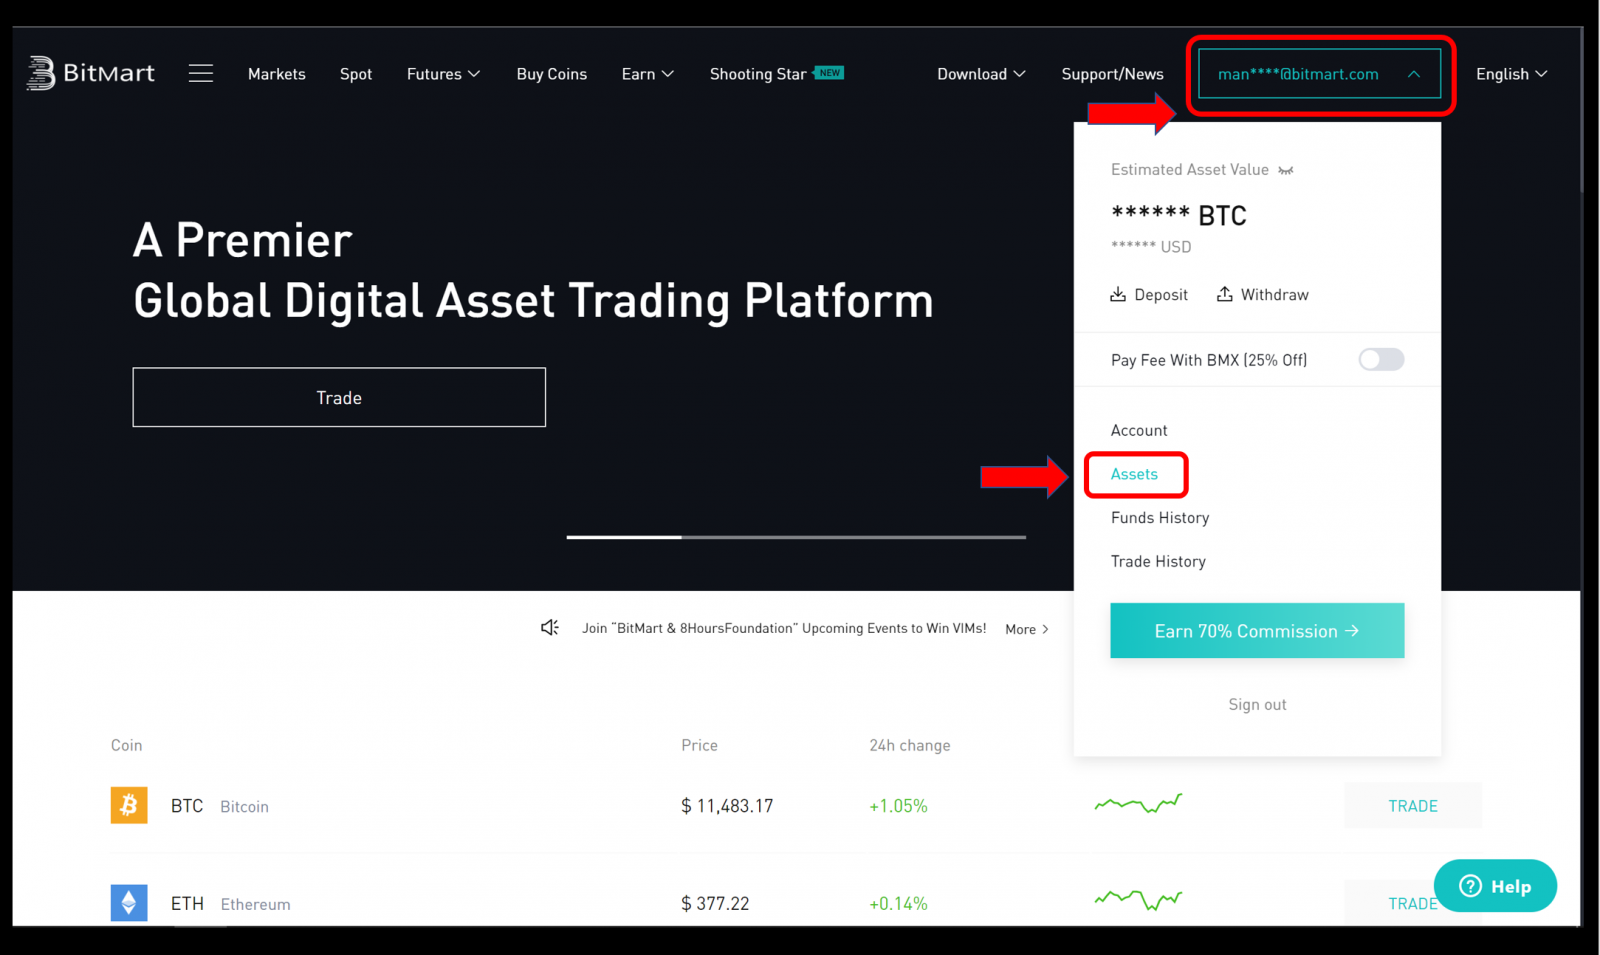 How to Verify Account in BitMart